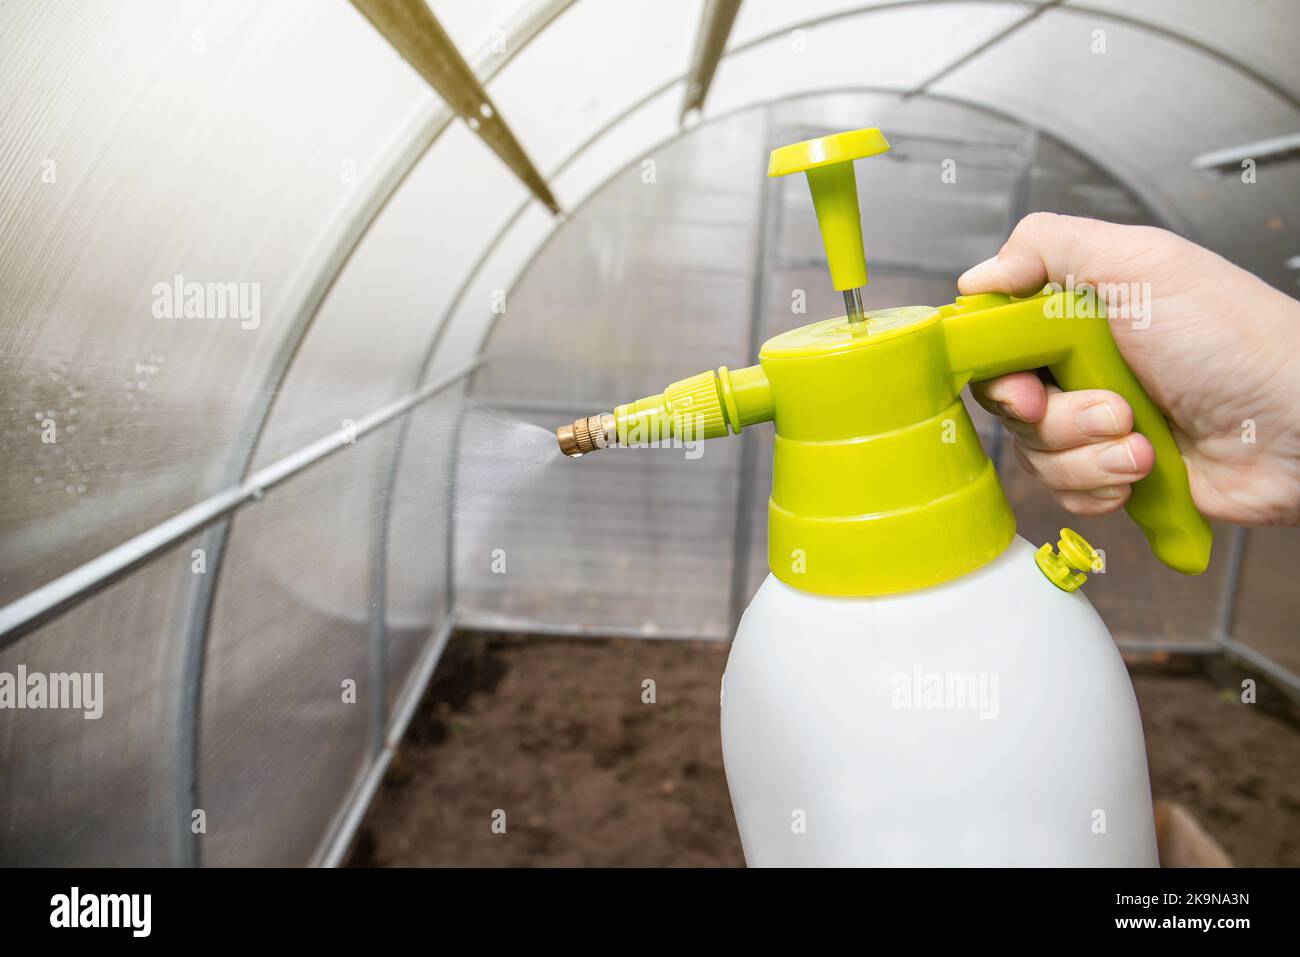 Cleaning the empty greenhouse with an antibacterial cleaner liquid, gardener hand spray it on the greenhouse wall for disinfection. Autumn gardening. Stock Photo